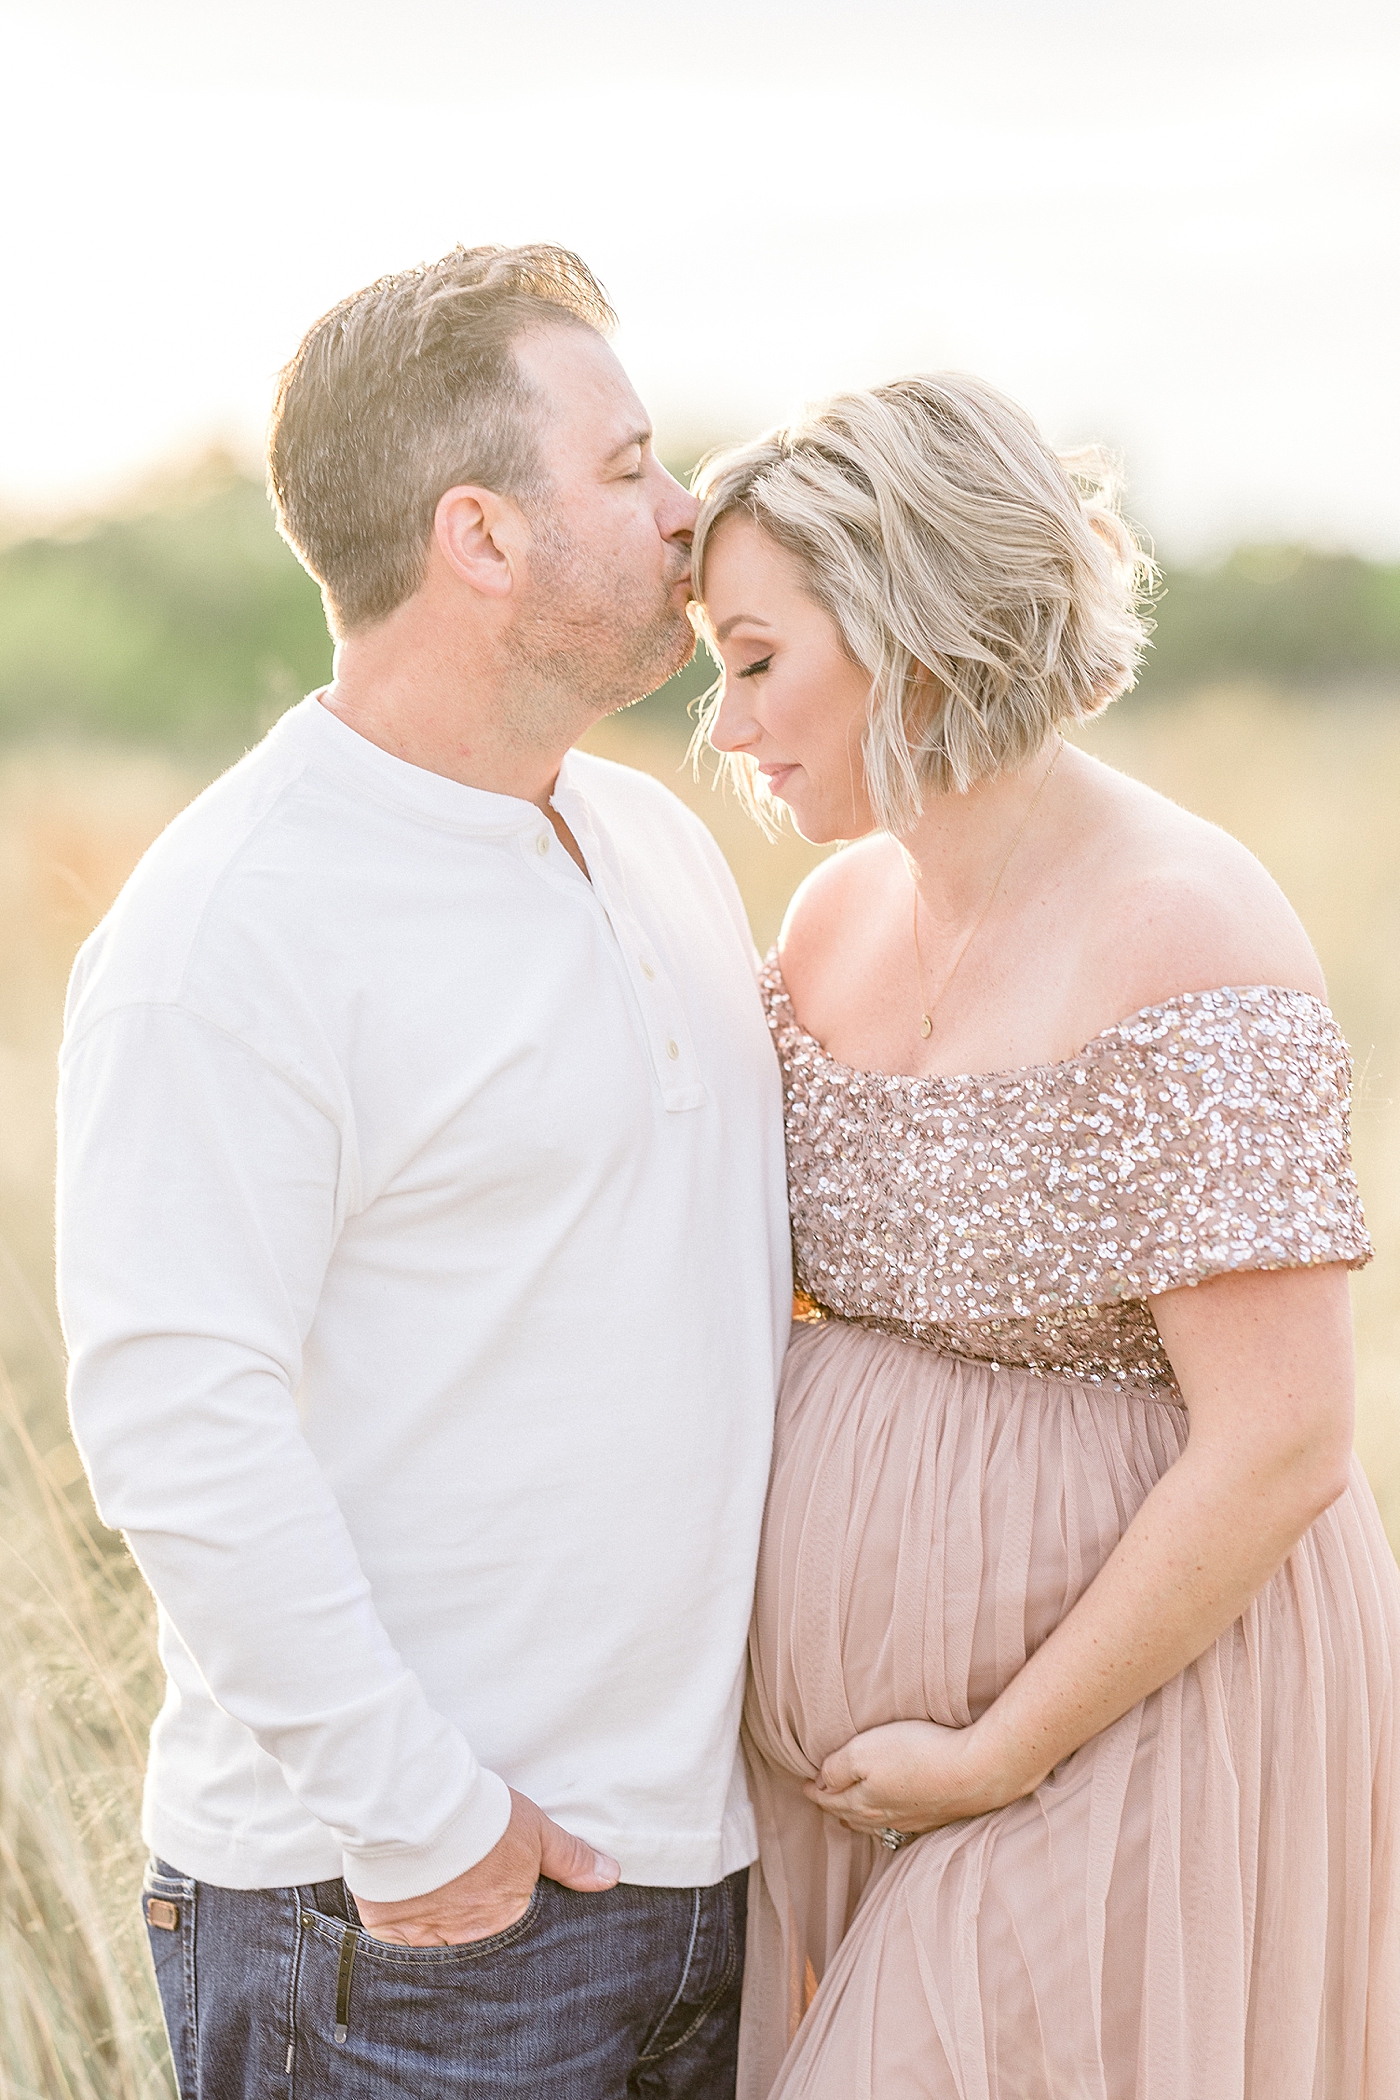 Husband kissing his wife on forehead during maternity session at Cypress Point Park with Brittany Elise Photography.